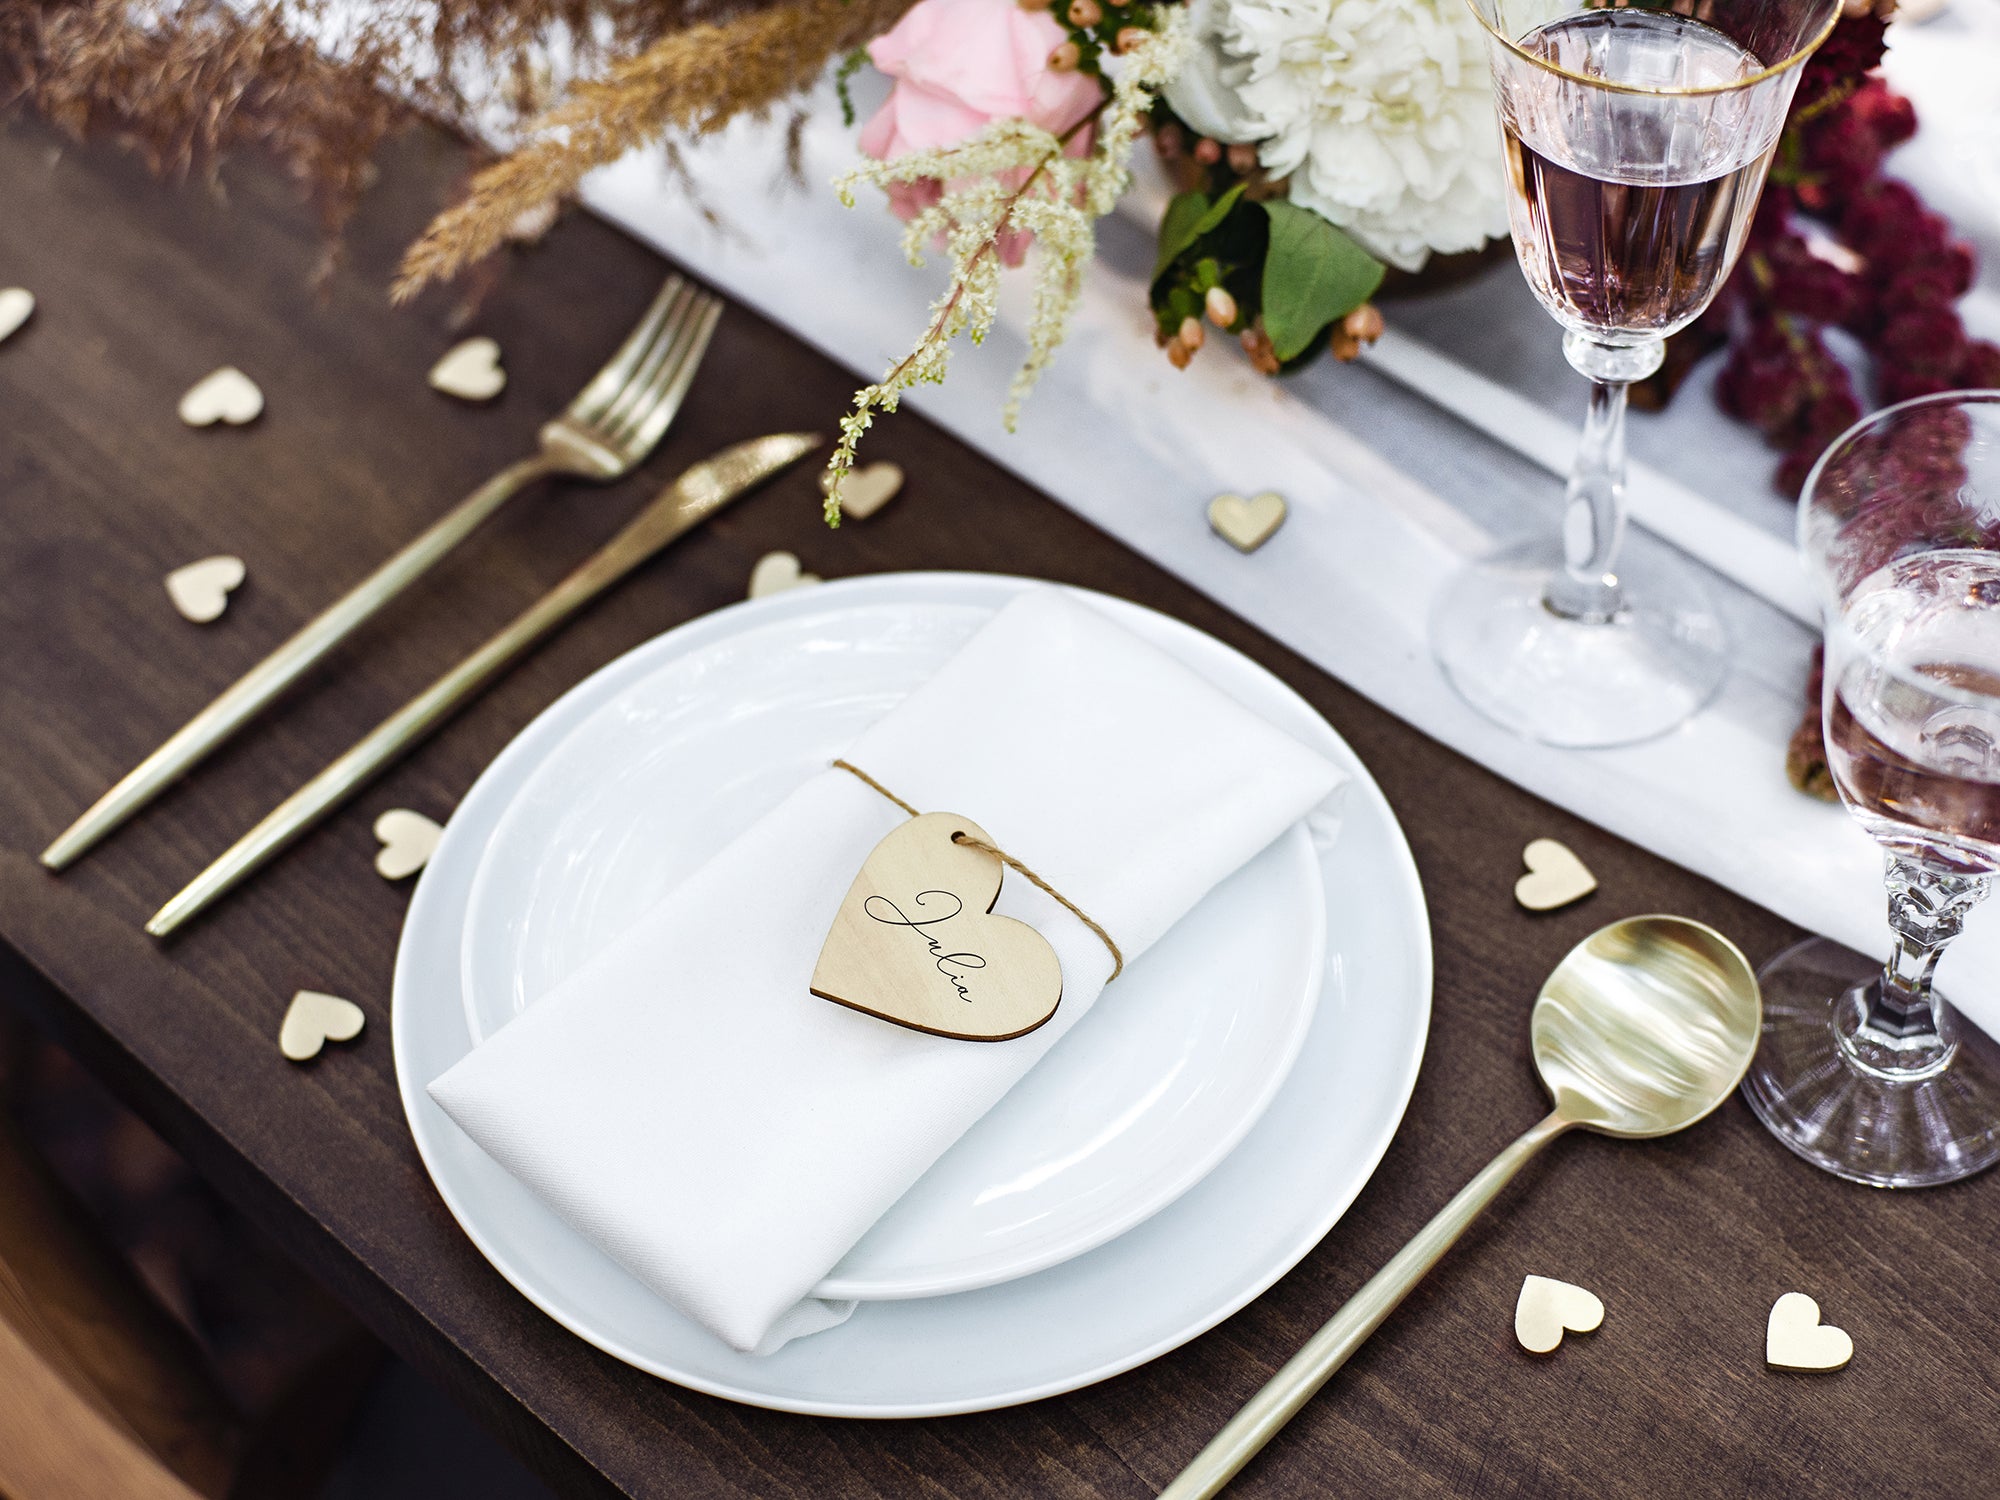 Wooden Confetti Hearts on table